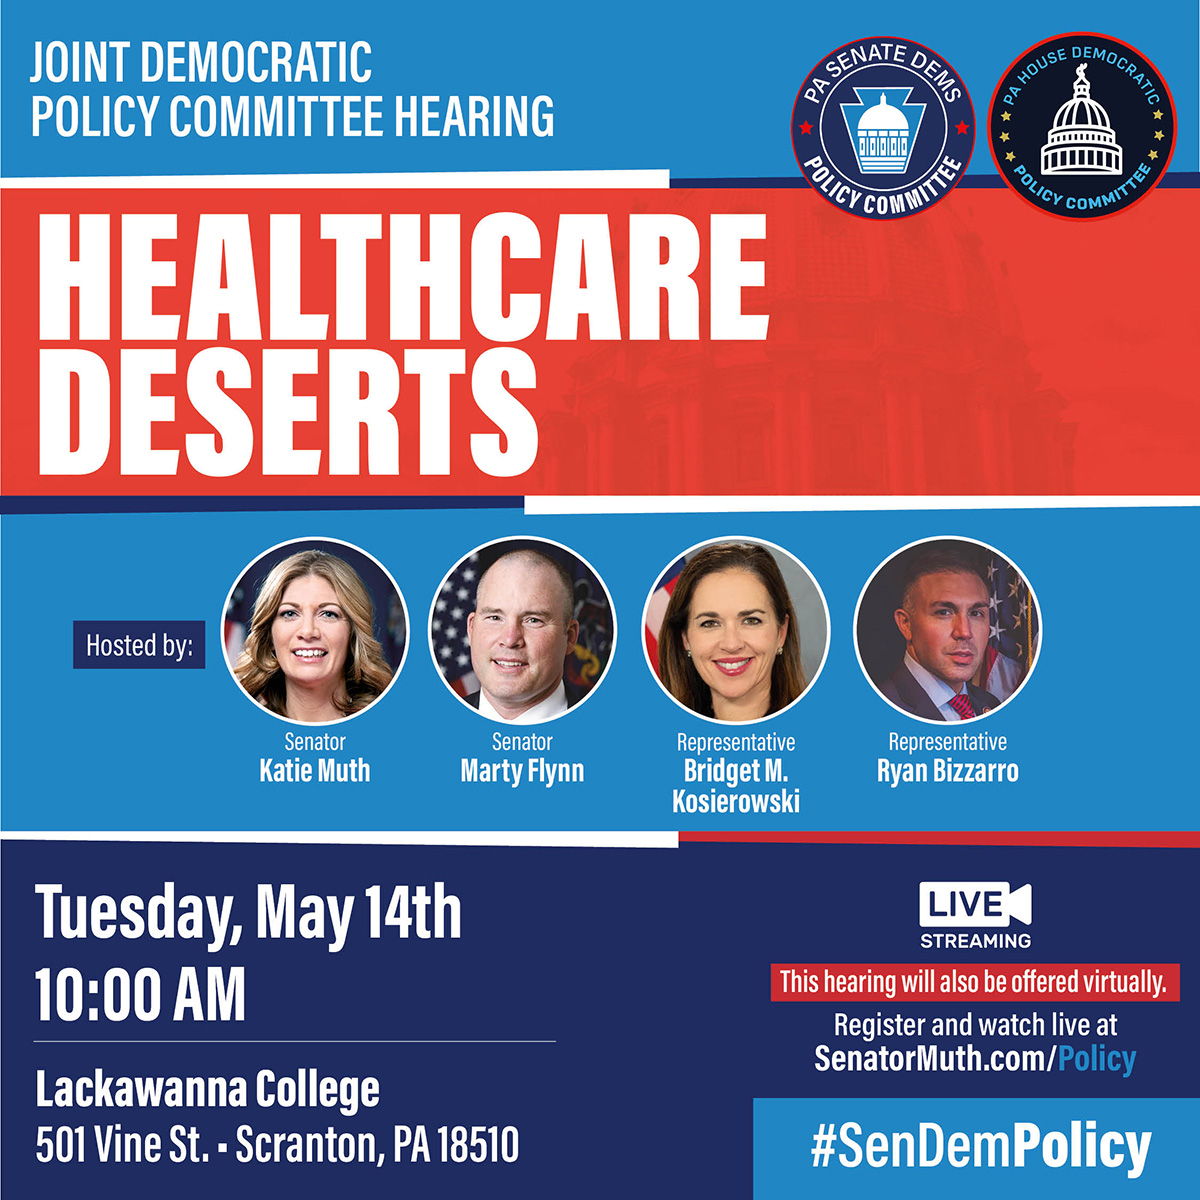 The Joint House & #SenDemPolicy Committee will hold a hearing on healthcare deserts in the Commonwealth on Tuesday. Hearing hosts include @SenMartyFlynn and @RepBridget. Register for the hearing 🔻 SenatorMuth.com/policy/